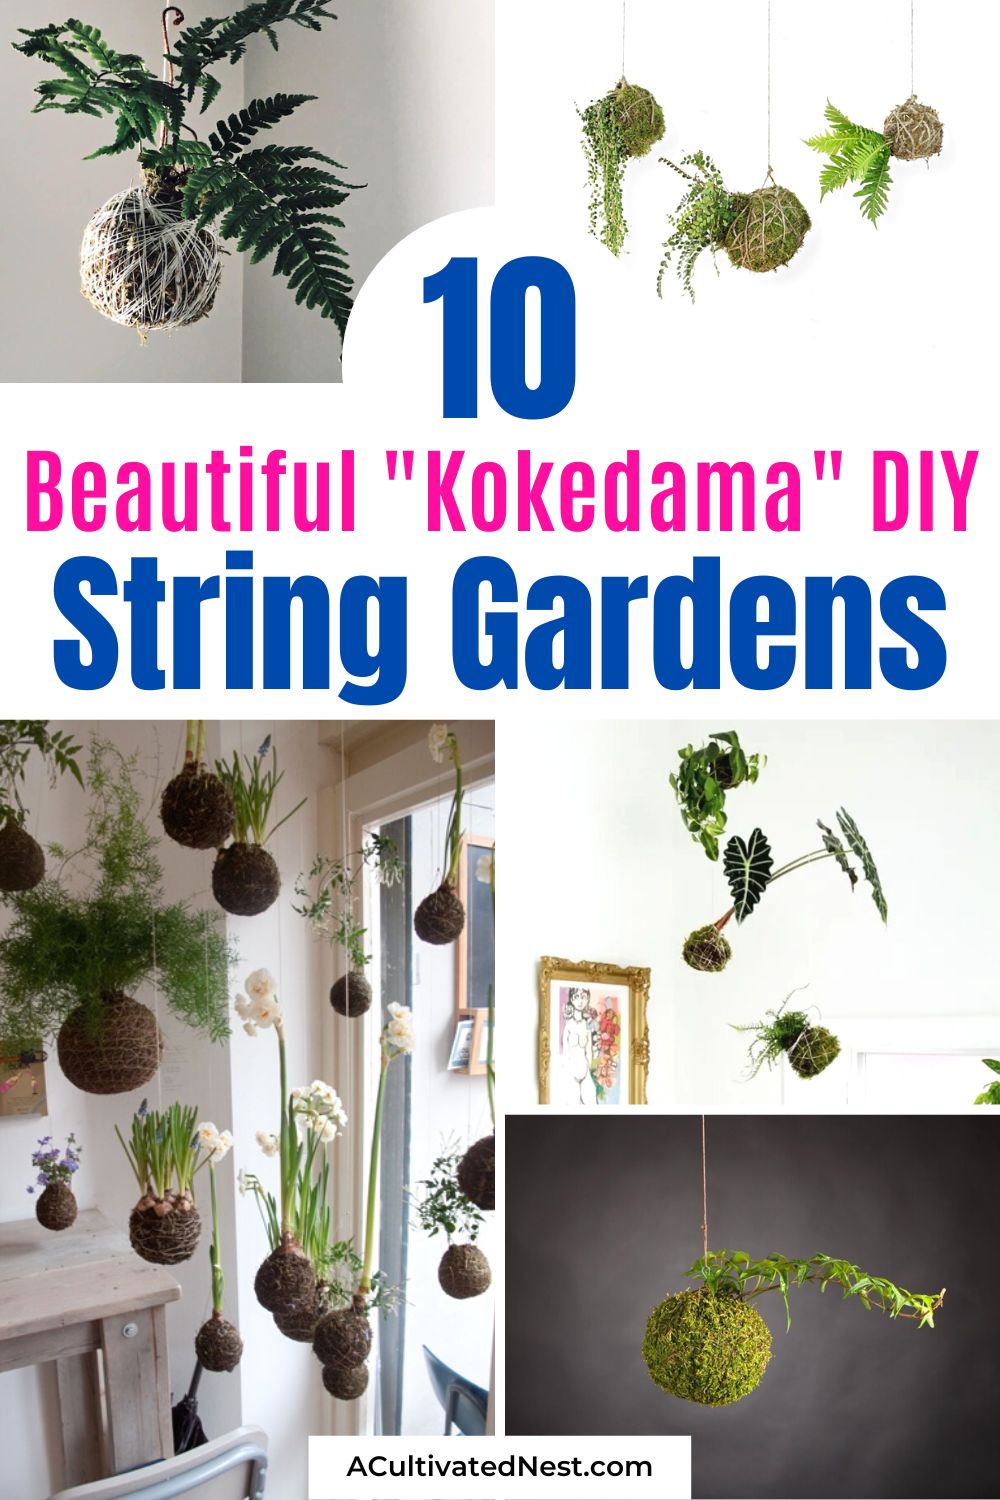 10 DIY String Gardens "Kokedama"- If you want a different kind of indoor garden, you should check out these DIY string gardens called "kokedama" (hanging moss ball planters)! They're easy to make, and look beautiful! | #indoorGarden #gardening #garden #gardenIdeas #ACultivatedNest